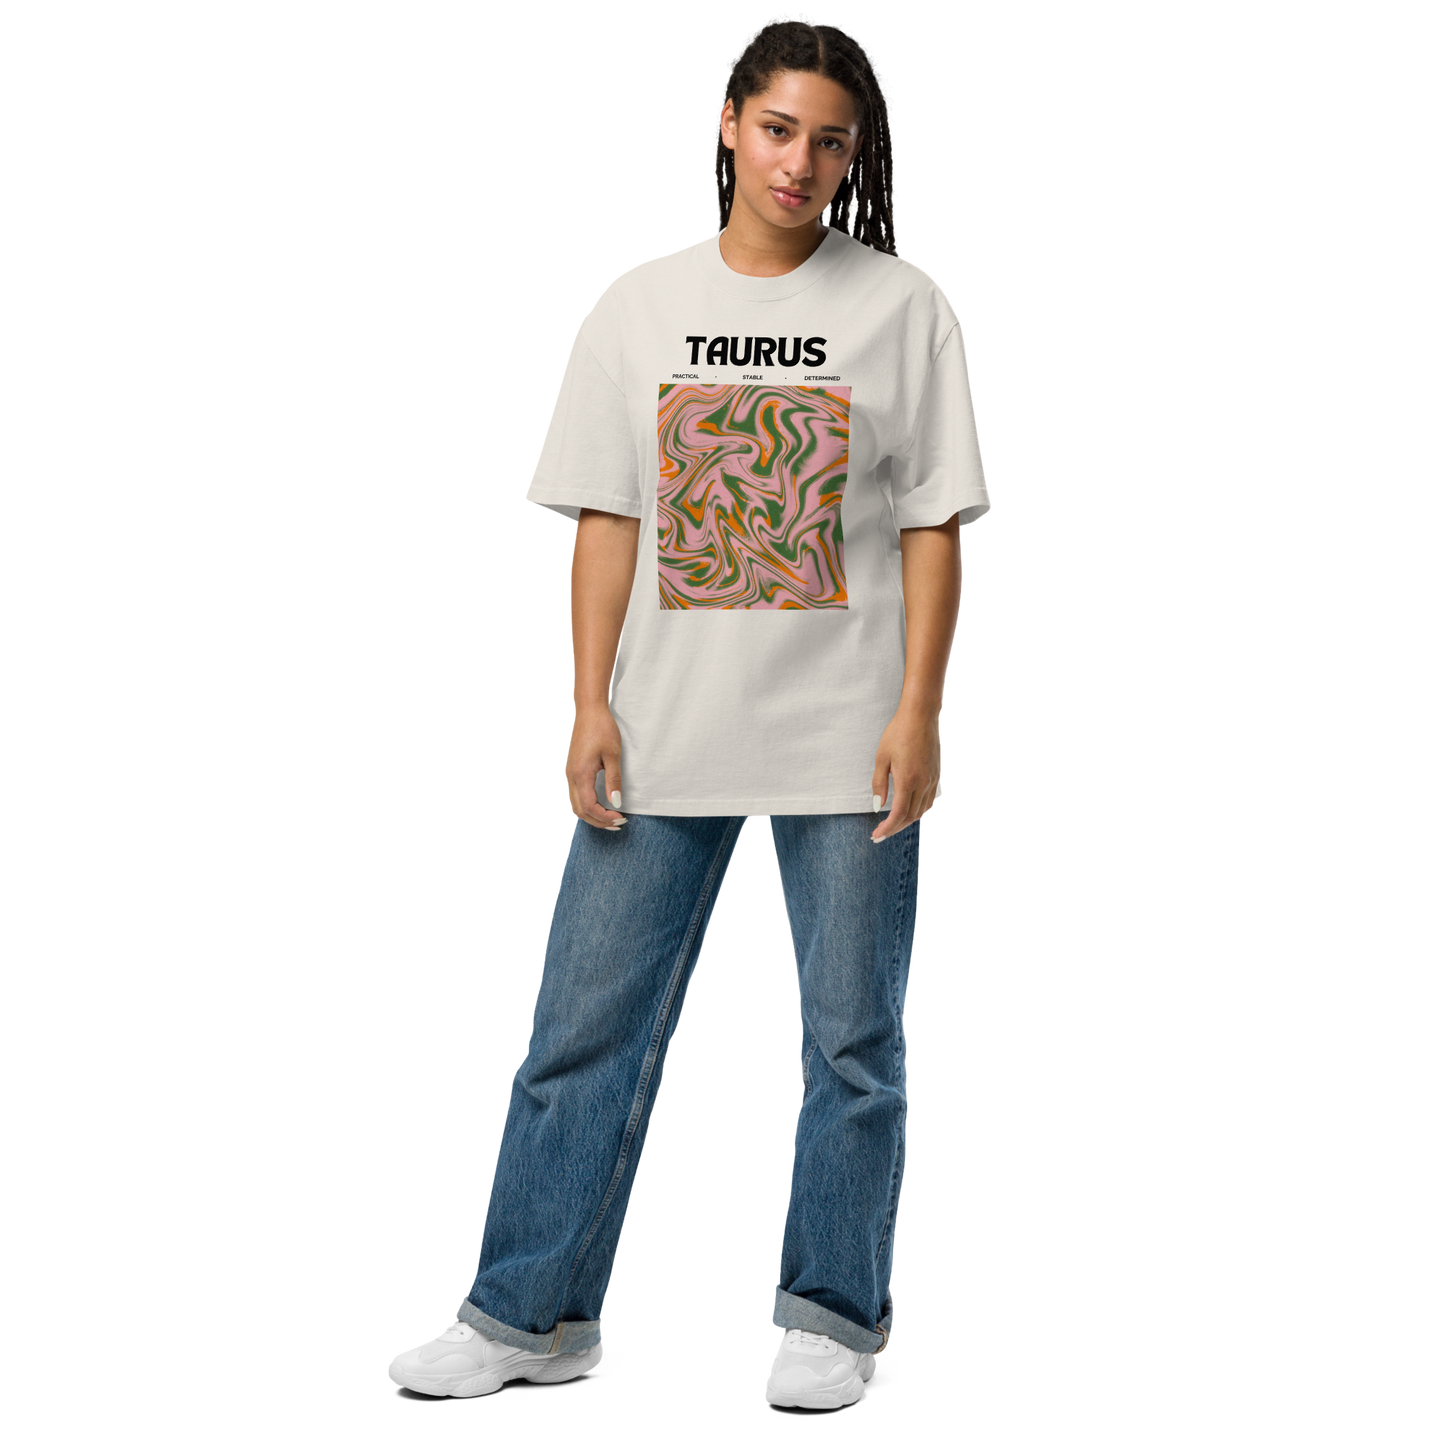 Woman wearing a Faded Bone Taurus Oversized T-Shirt featuring an Abstract Taurus Star Sign graphic on the chest - Cool Graphic Zodiac Oversized Tees - Boozy Fox